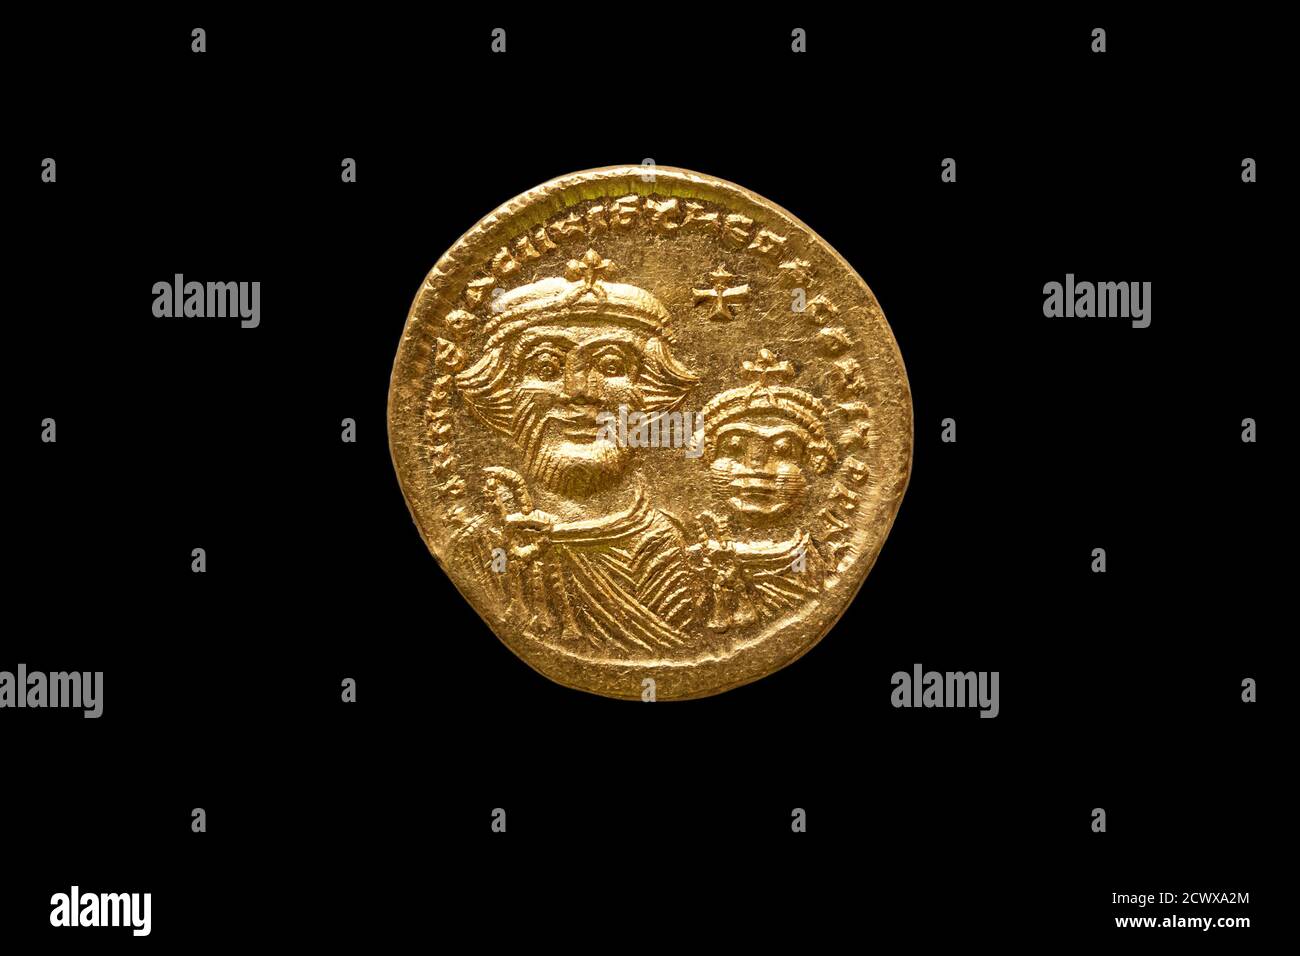 Gold Roman solidus replica coin of Roman Emperor Justinian I AD527-265 cut out and isolated on a black background stock photo Image Stock Photo